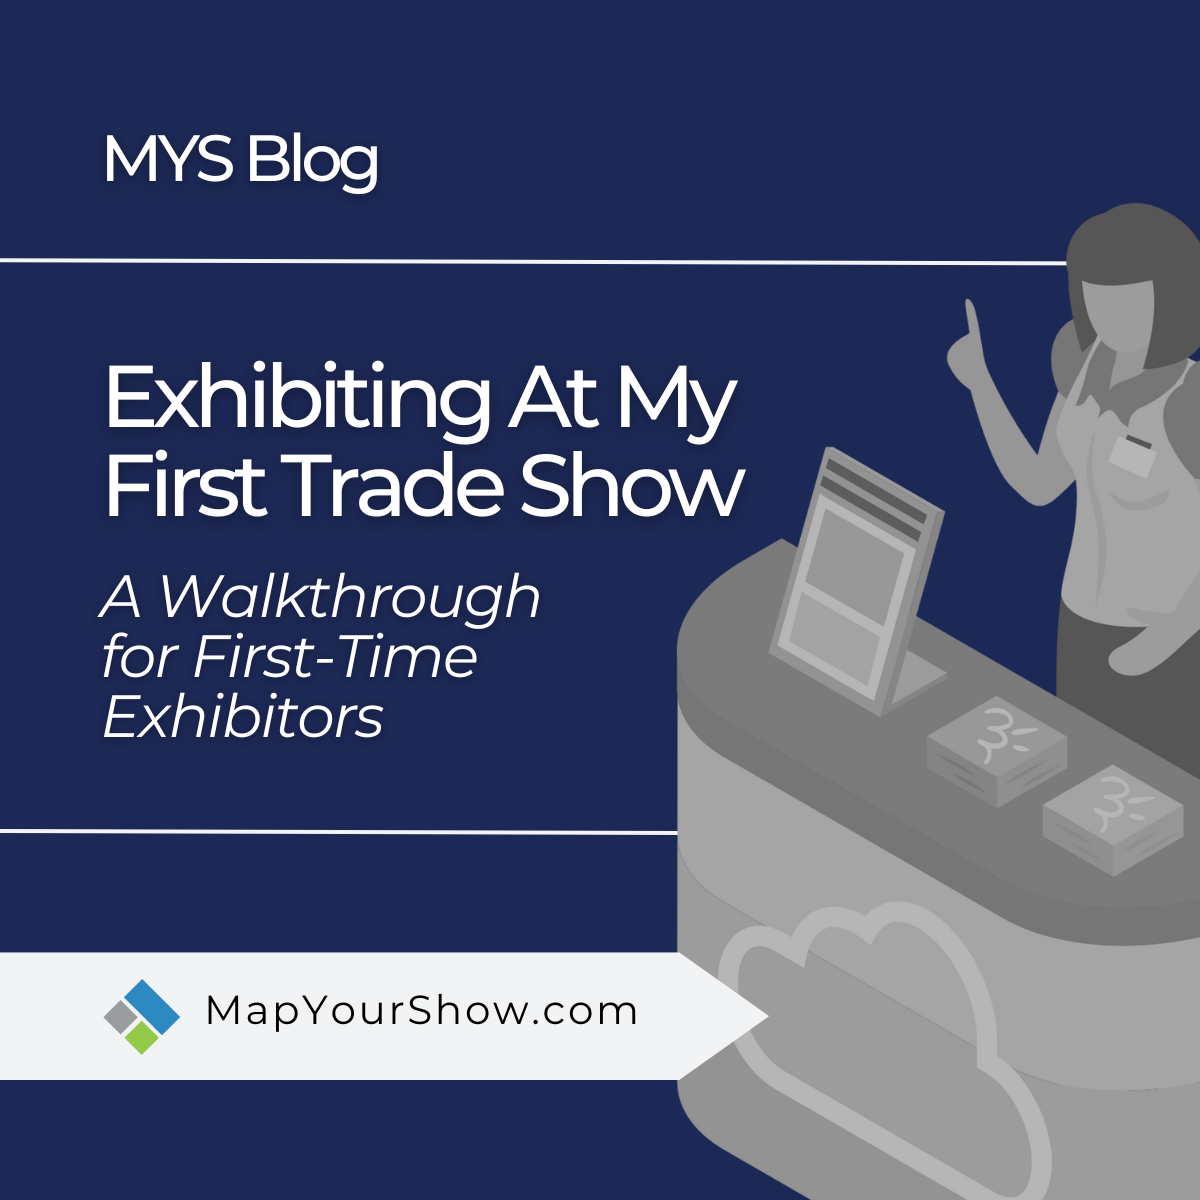 Exhibiting At My First Trade Show: A Walkthrough for First-Time Exhibitors. Map Your Show Blog